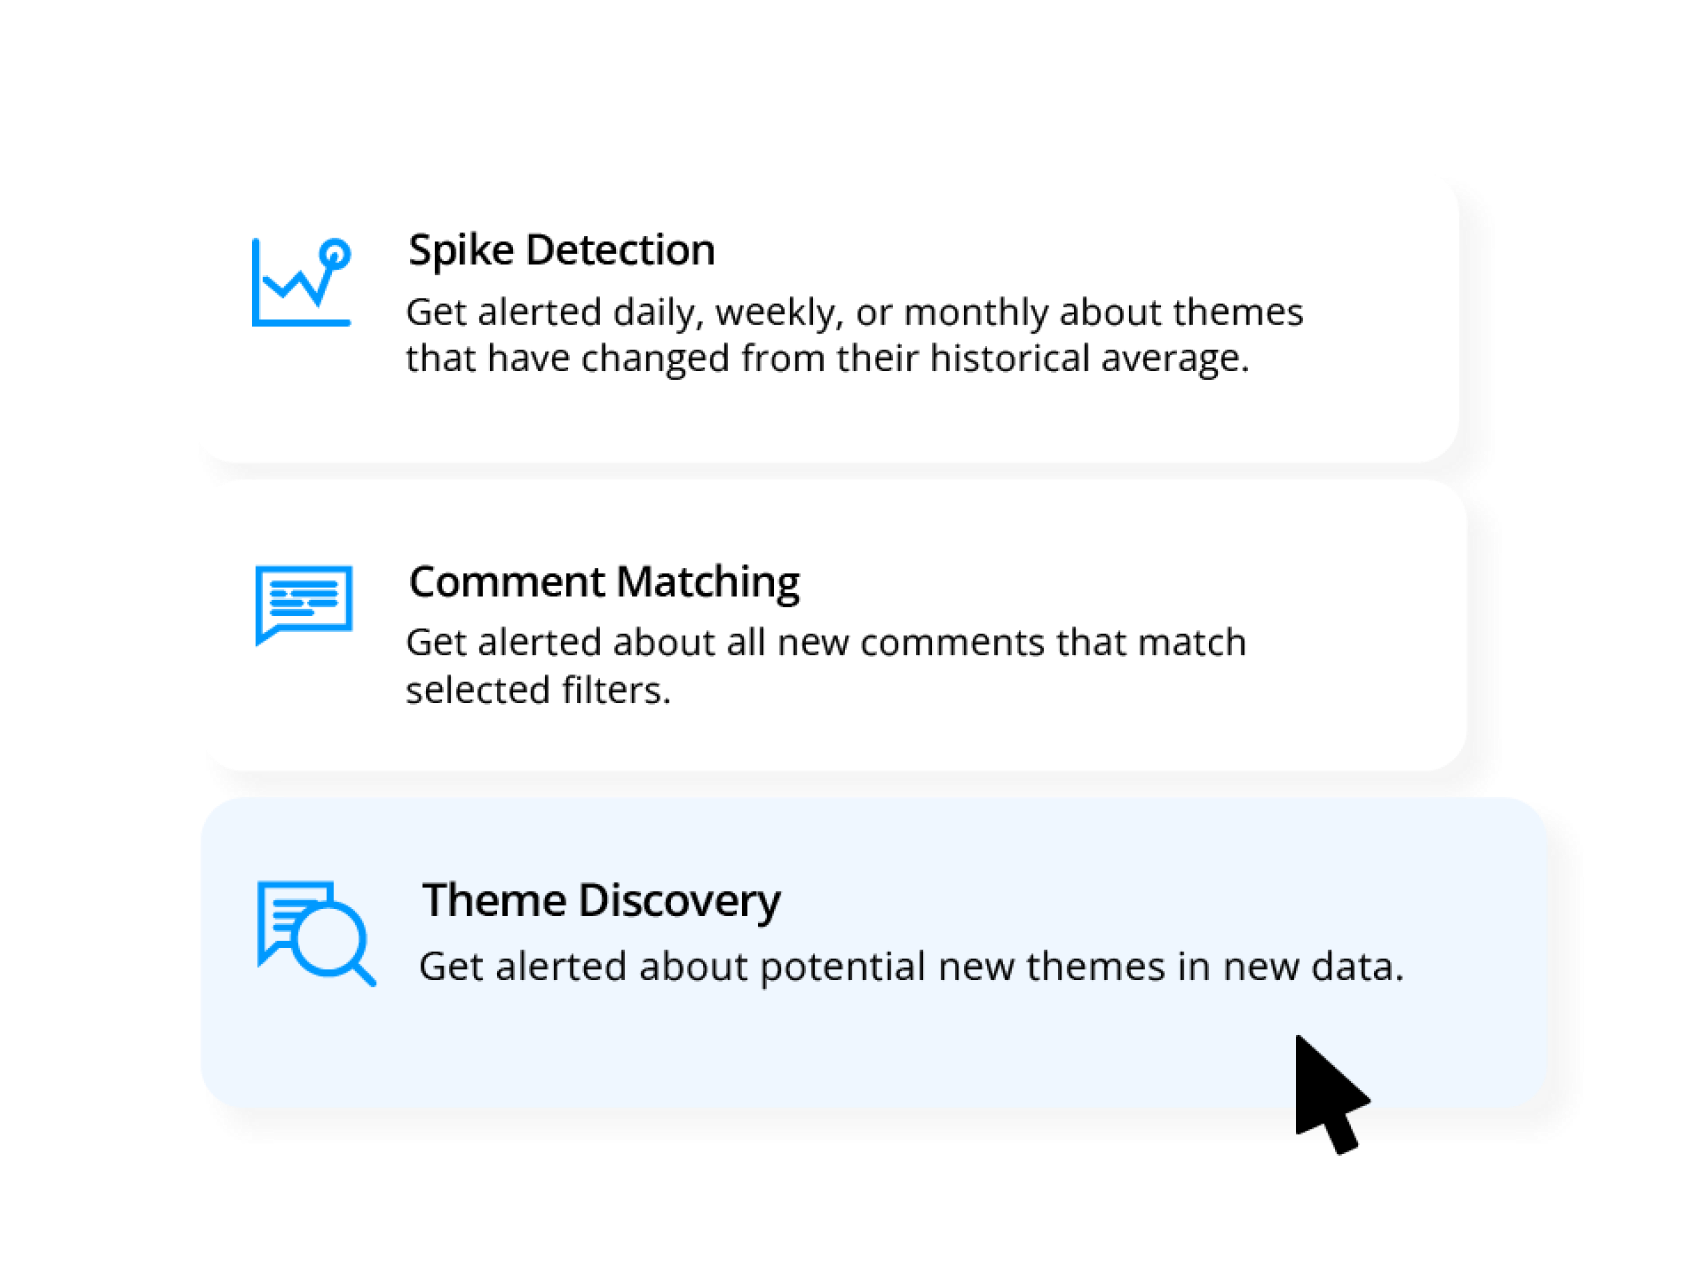 3 types of workflow notifications including: spike detection, comment matching and theme discovery